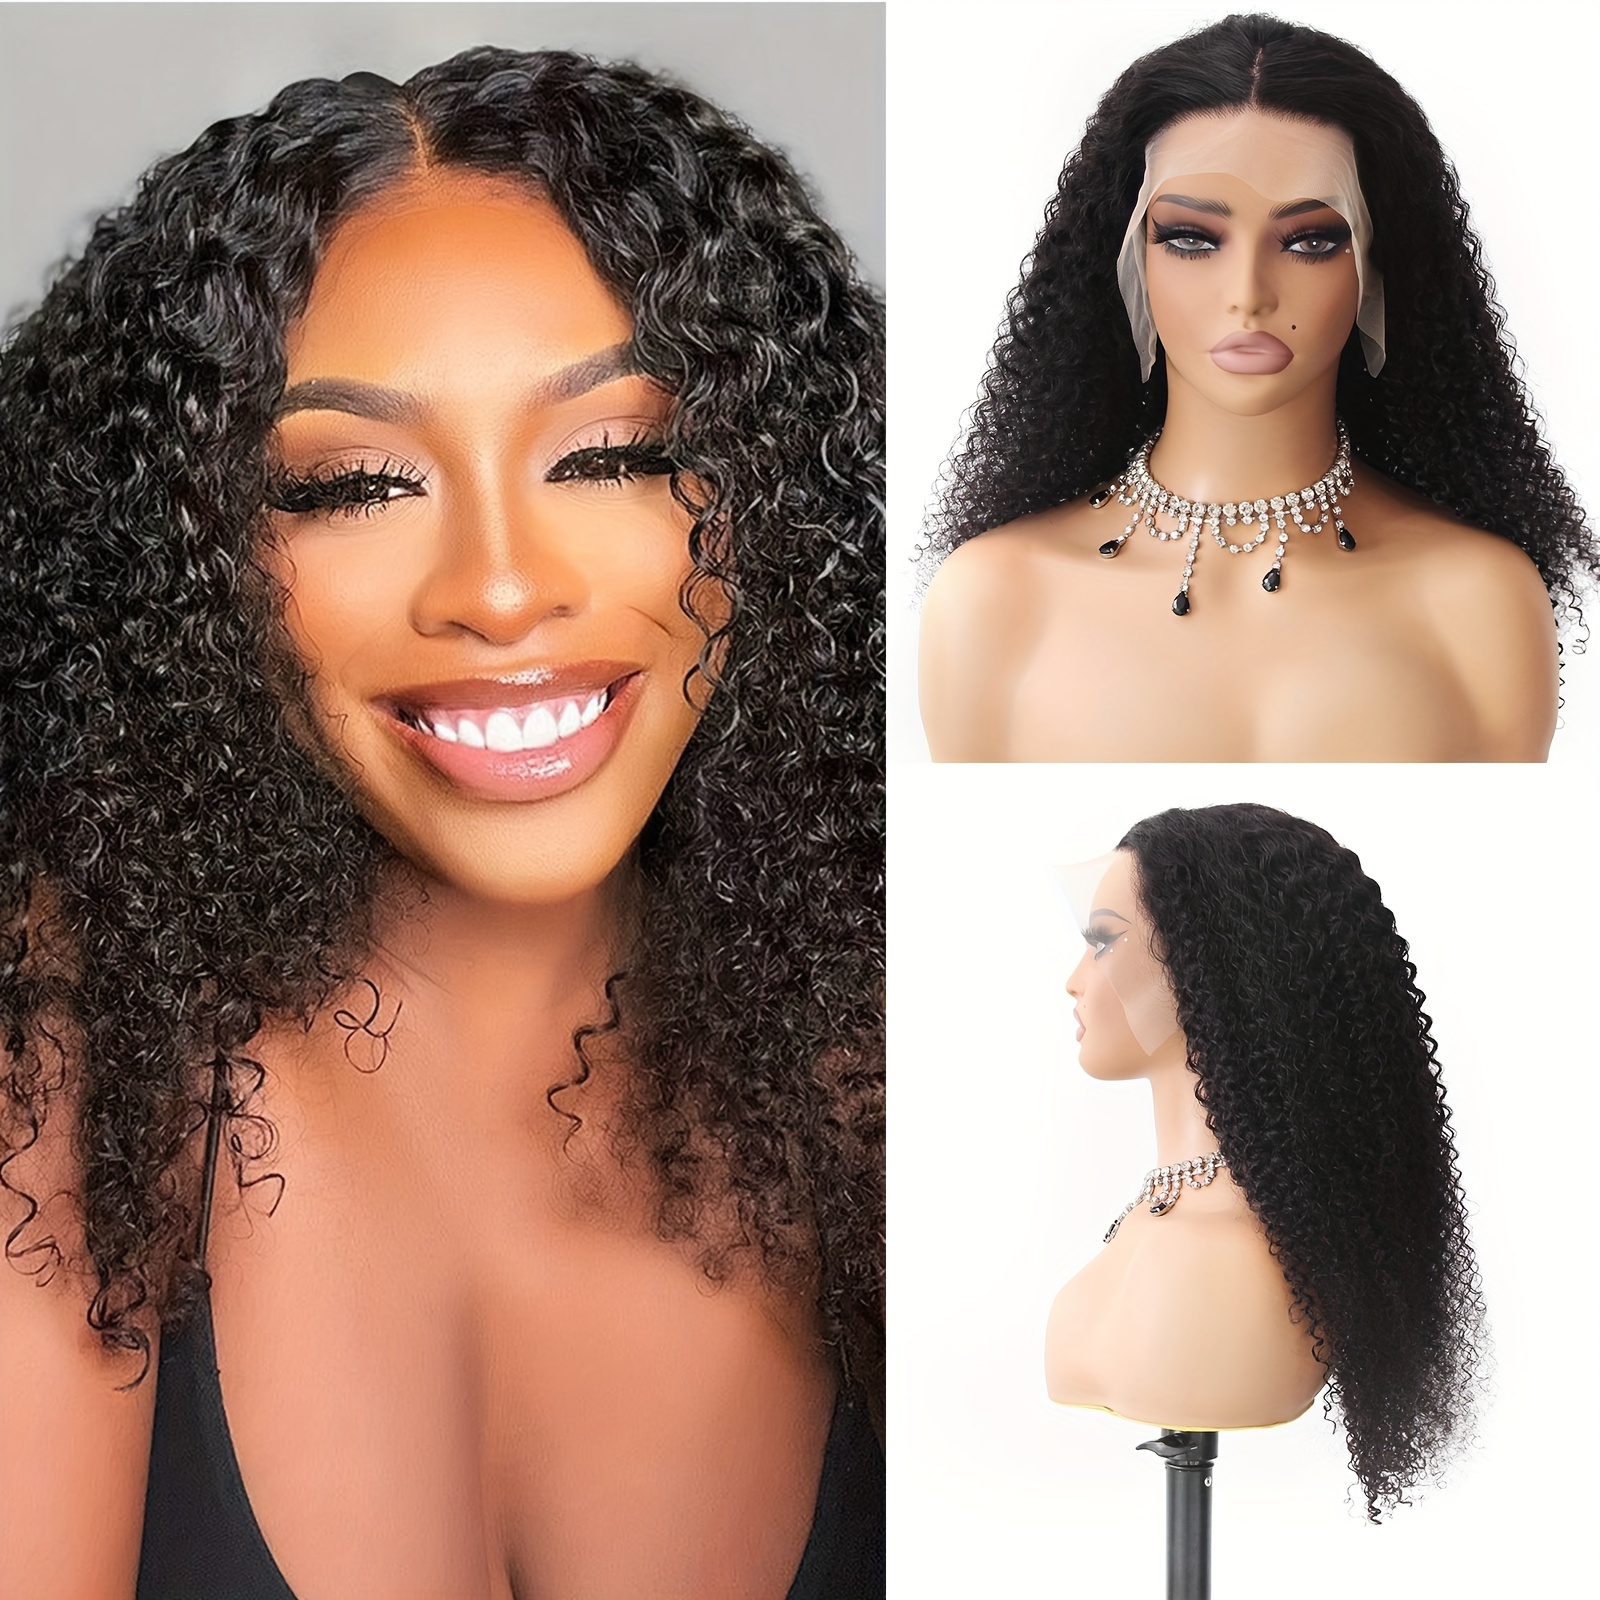  Talkyo Short Bob Wigs Lace Front Human Hair Wigs For Black  Women Curly Wigs With Baby Hair Pre Plucked Natural Hairline Wigs Body Wave  Lace Front Wig 13x6 (Black, One